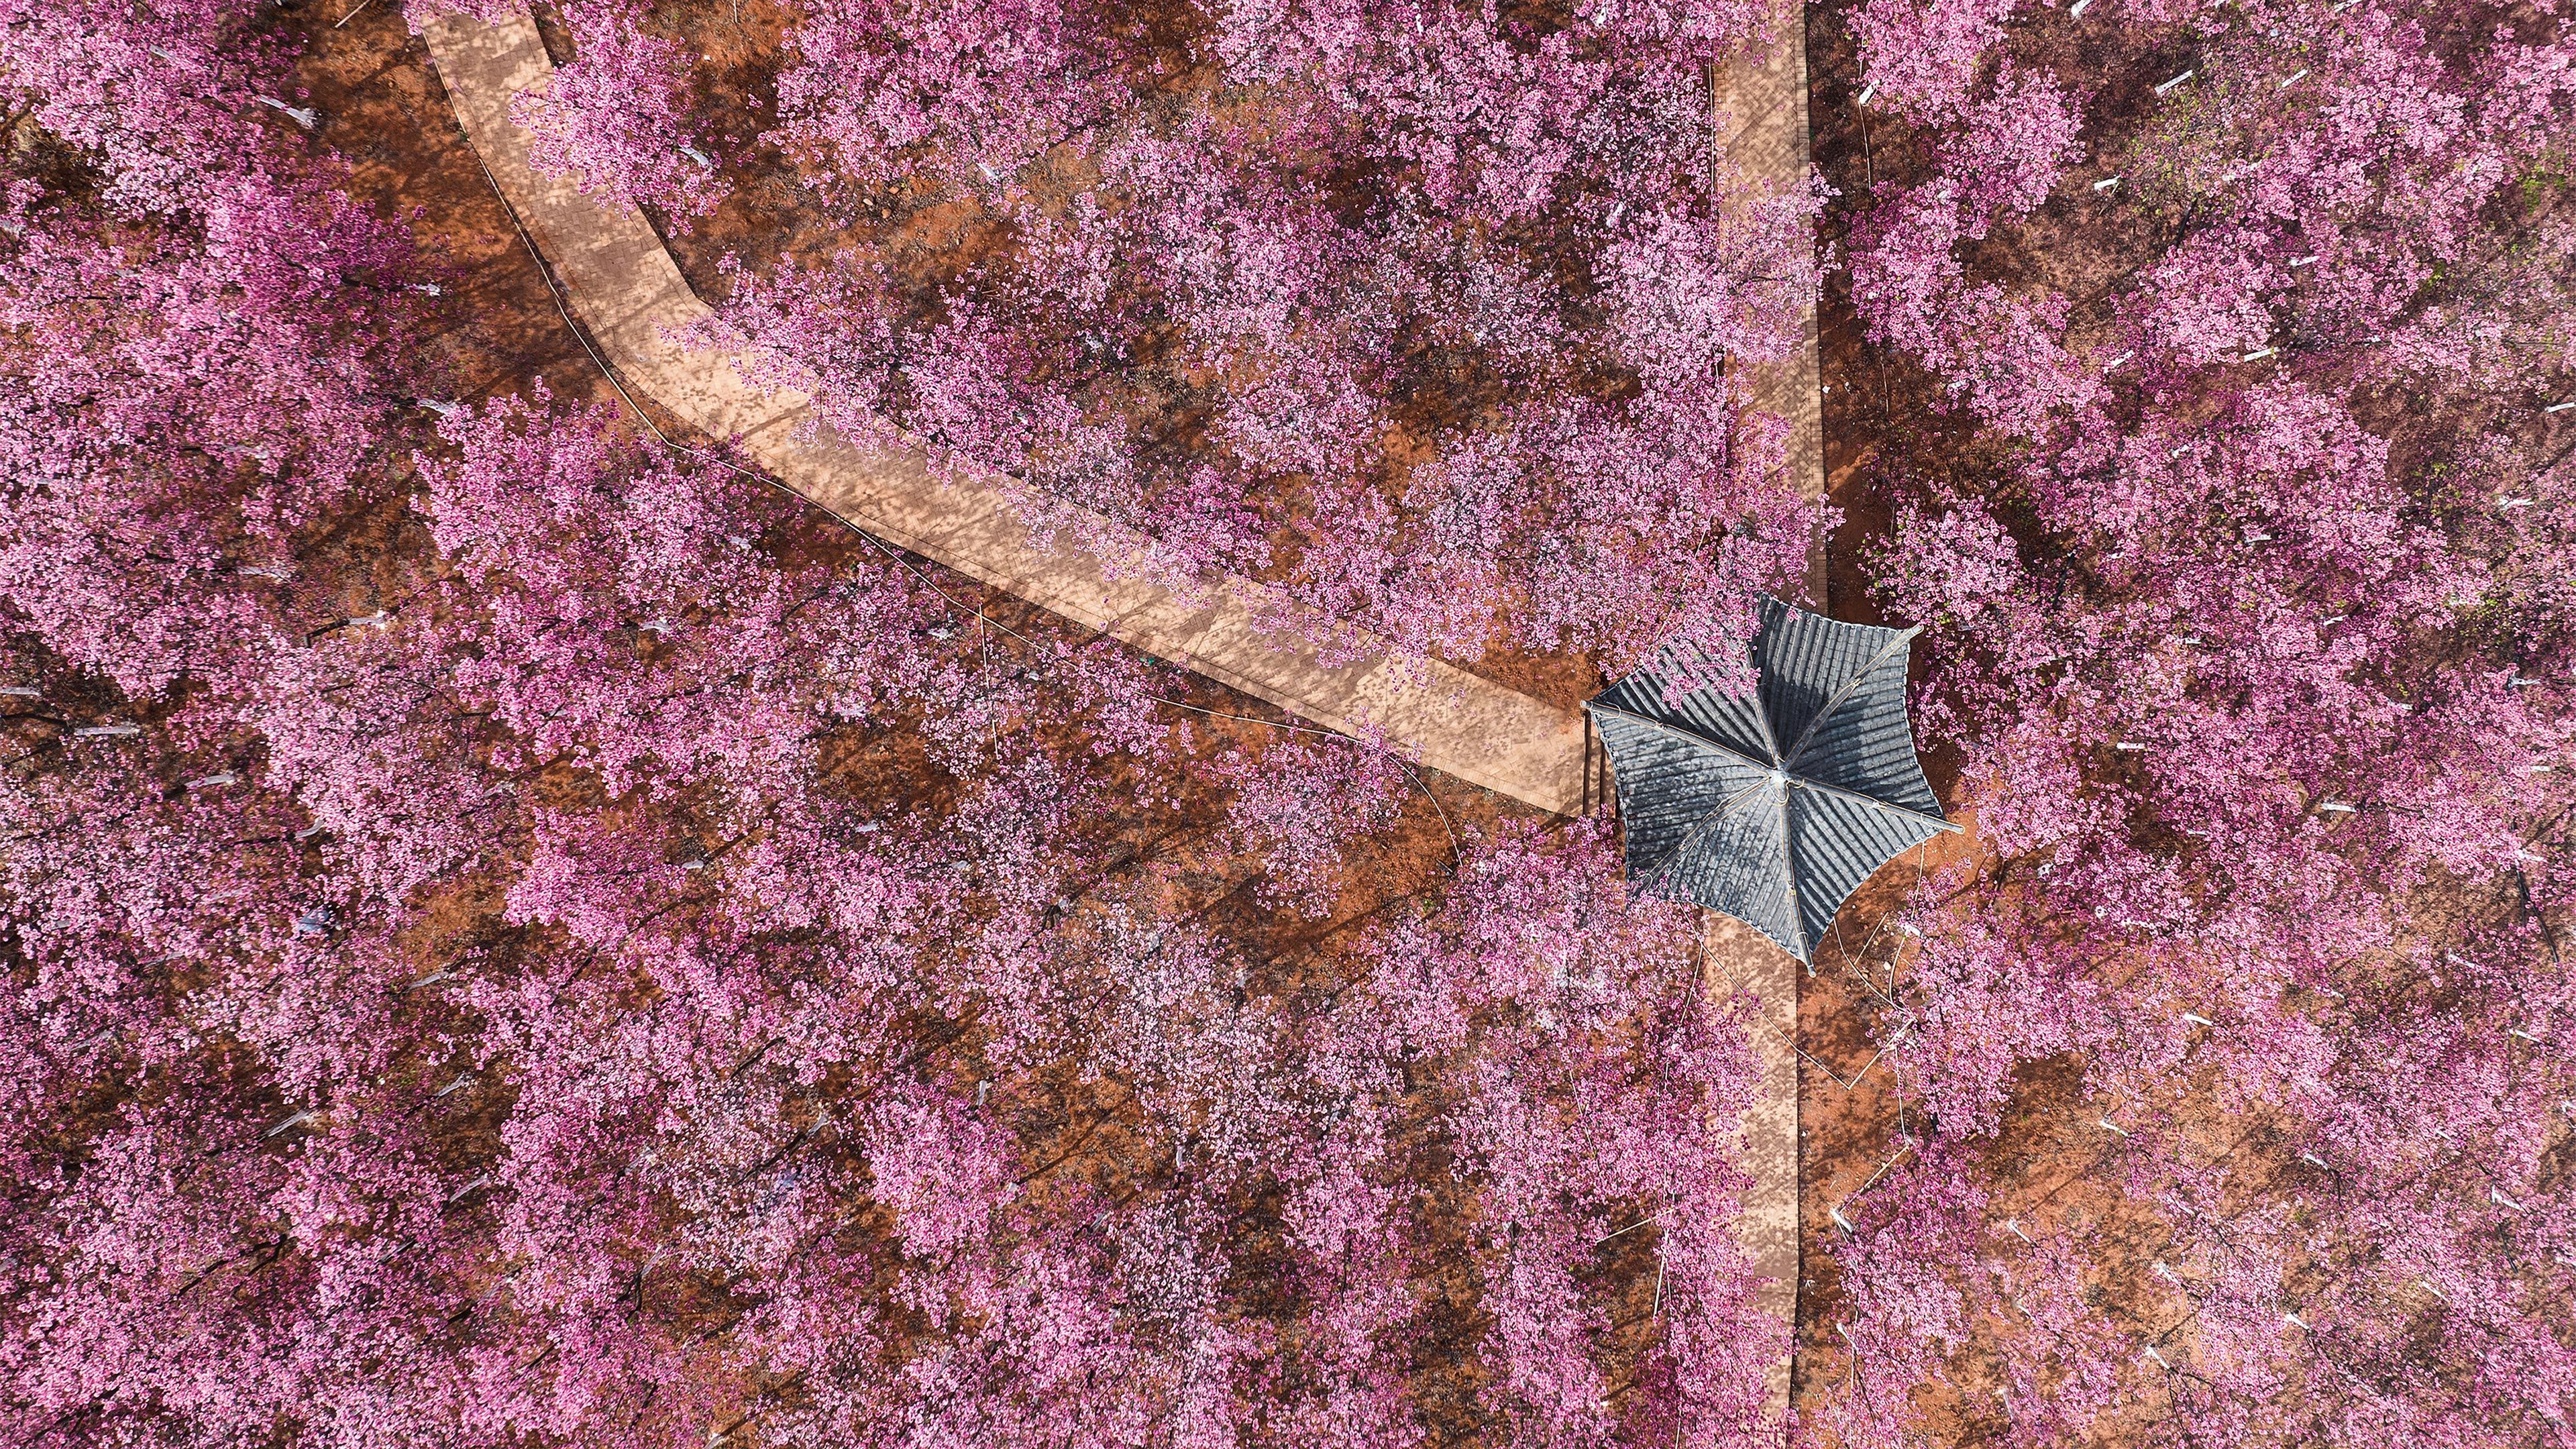 General 3840x2160 nature landscape flowers lilac aerial view cherry blossom Japanese Garden